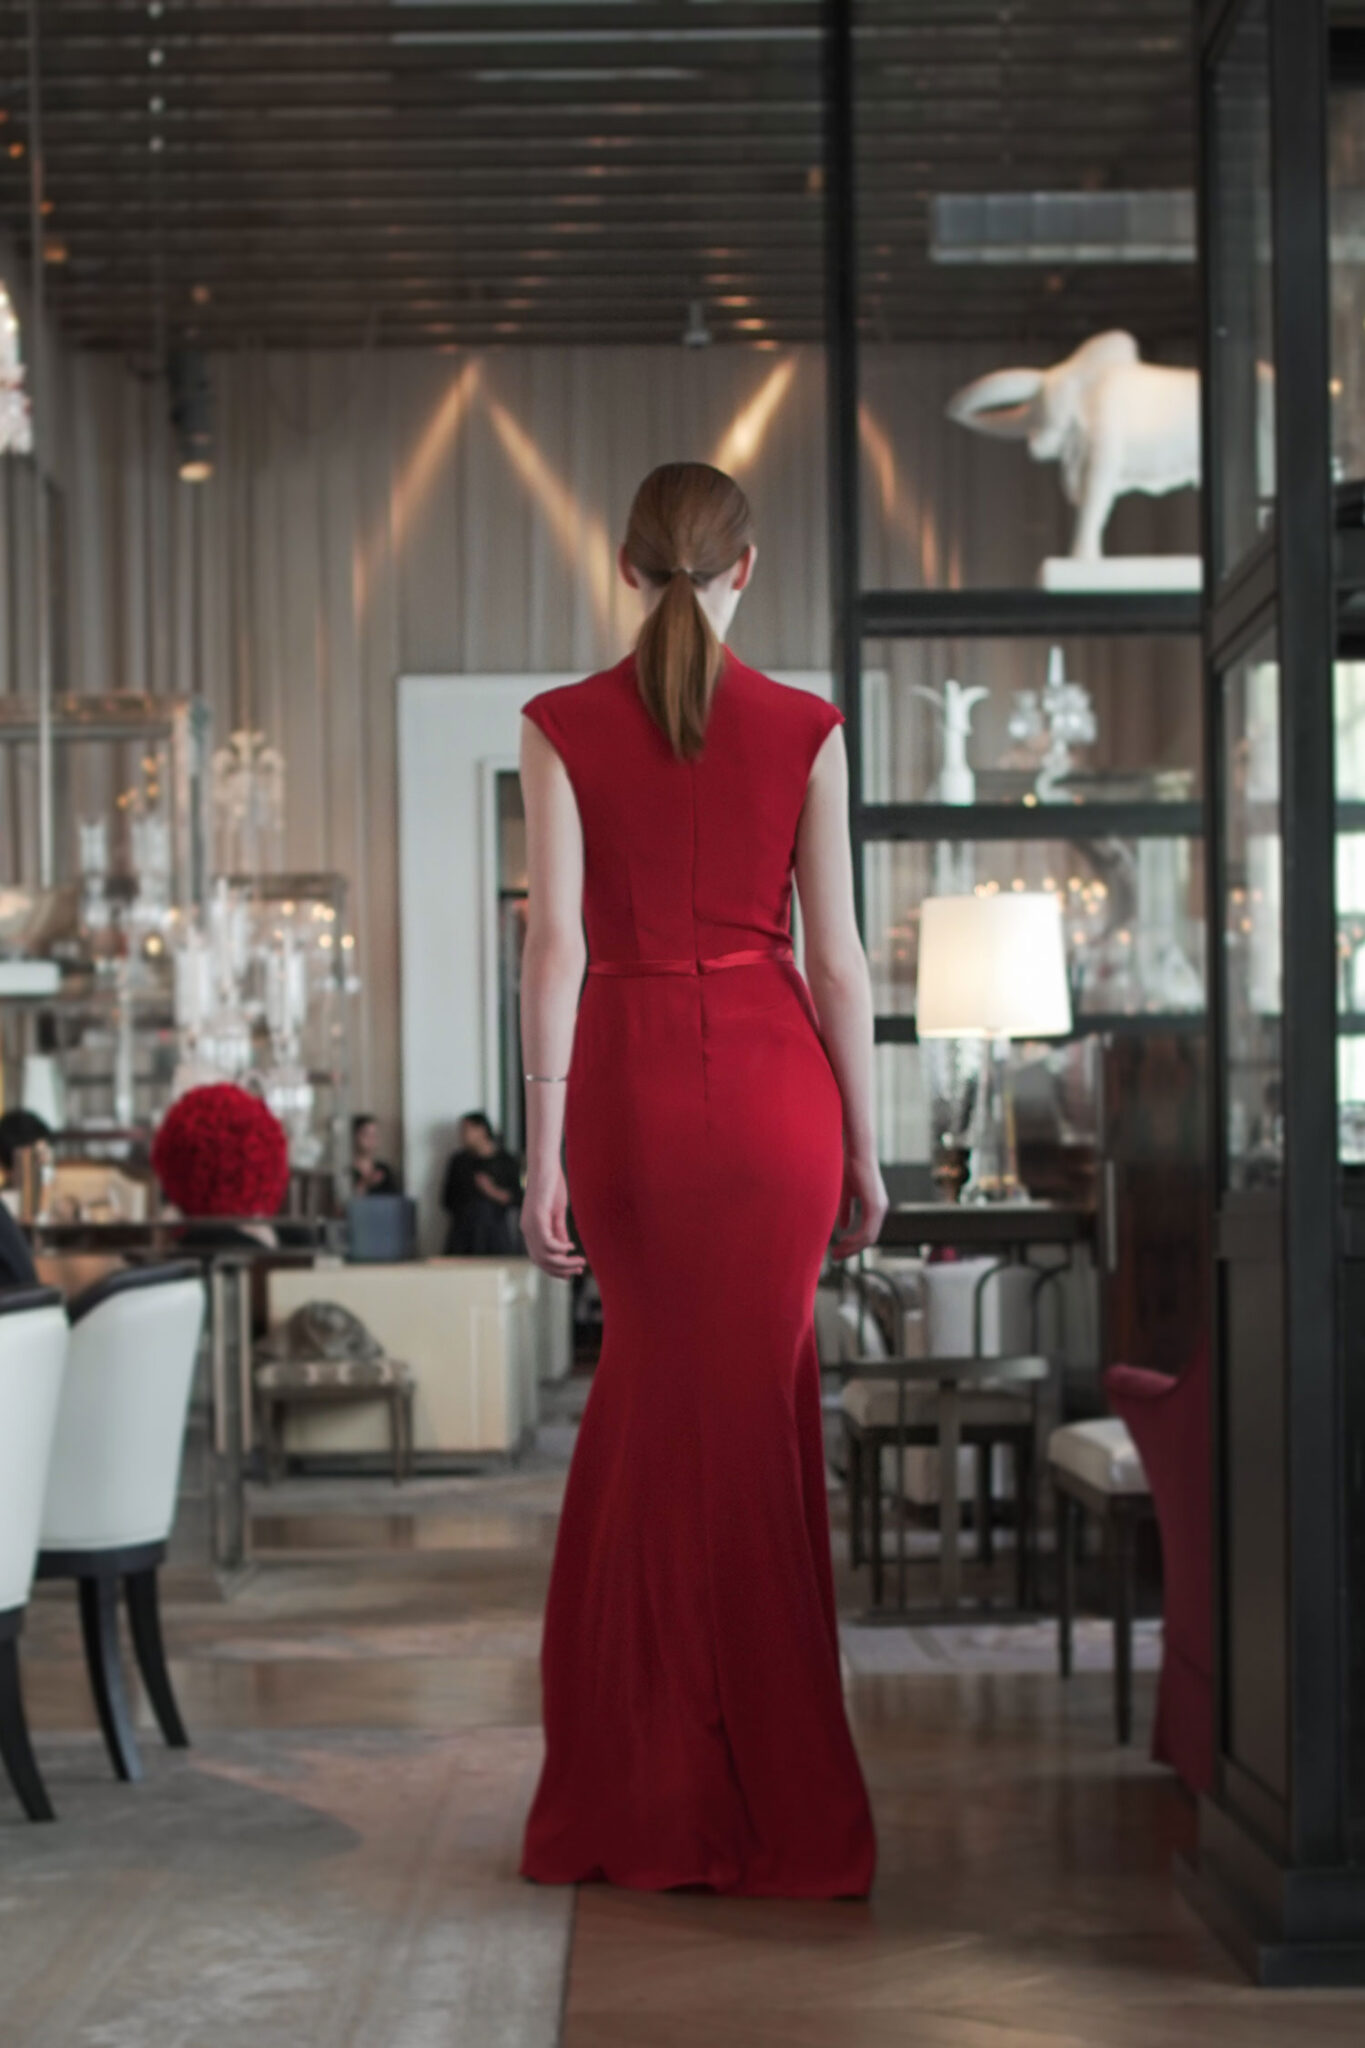 Promises Look 7 - The perfect red sleevless dress for special events - Verdin New York